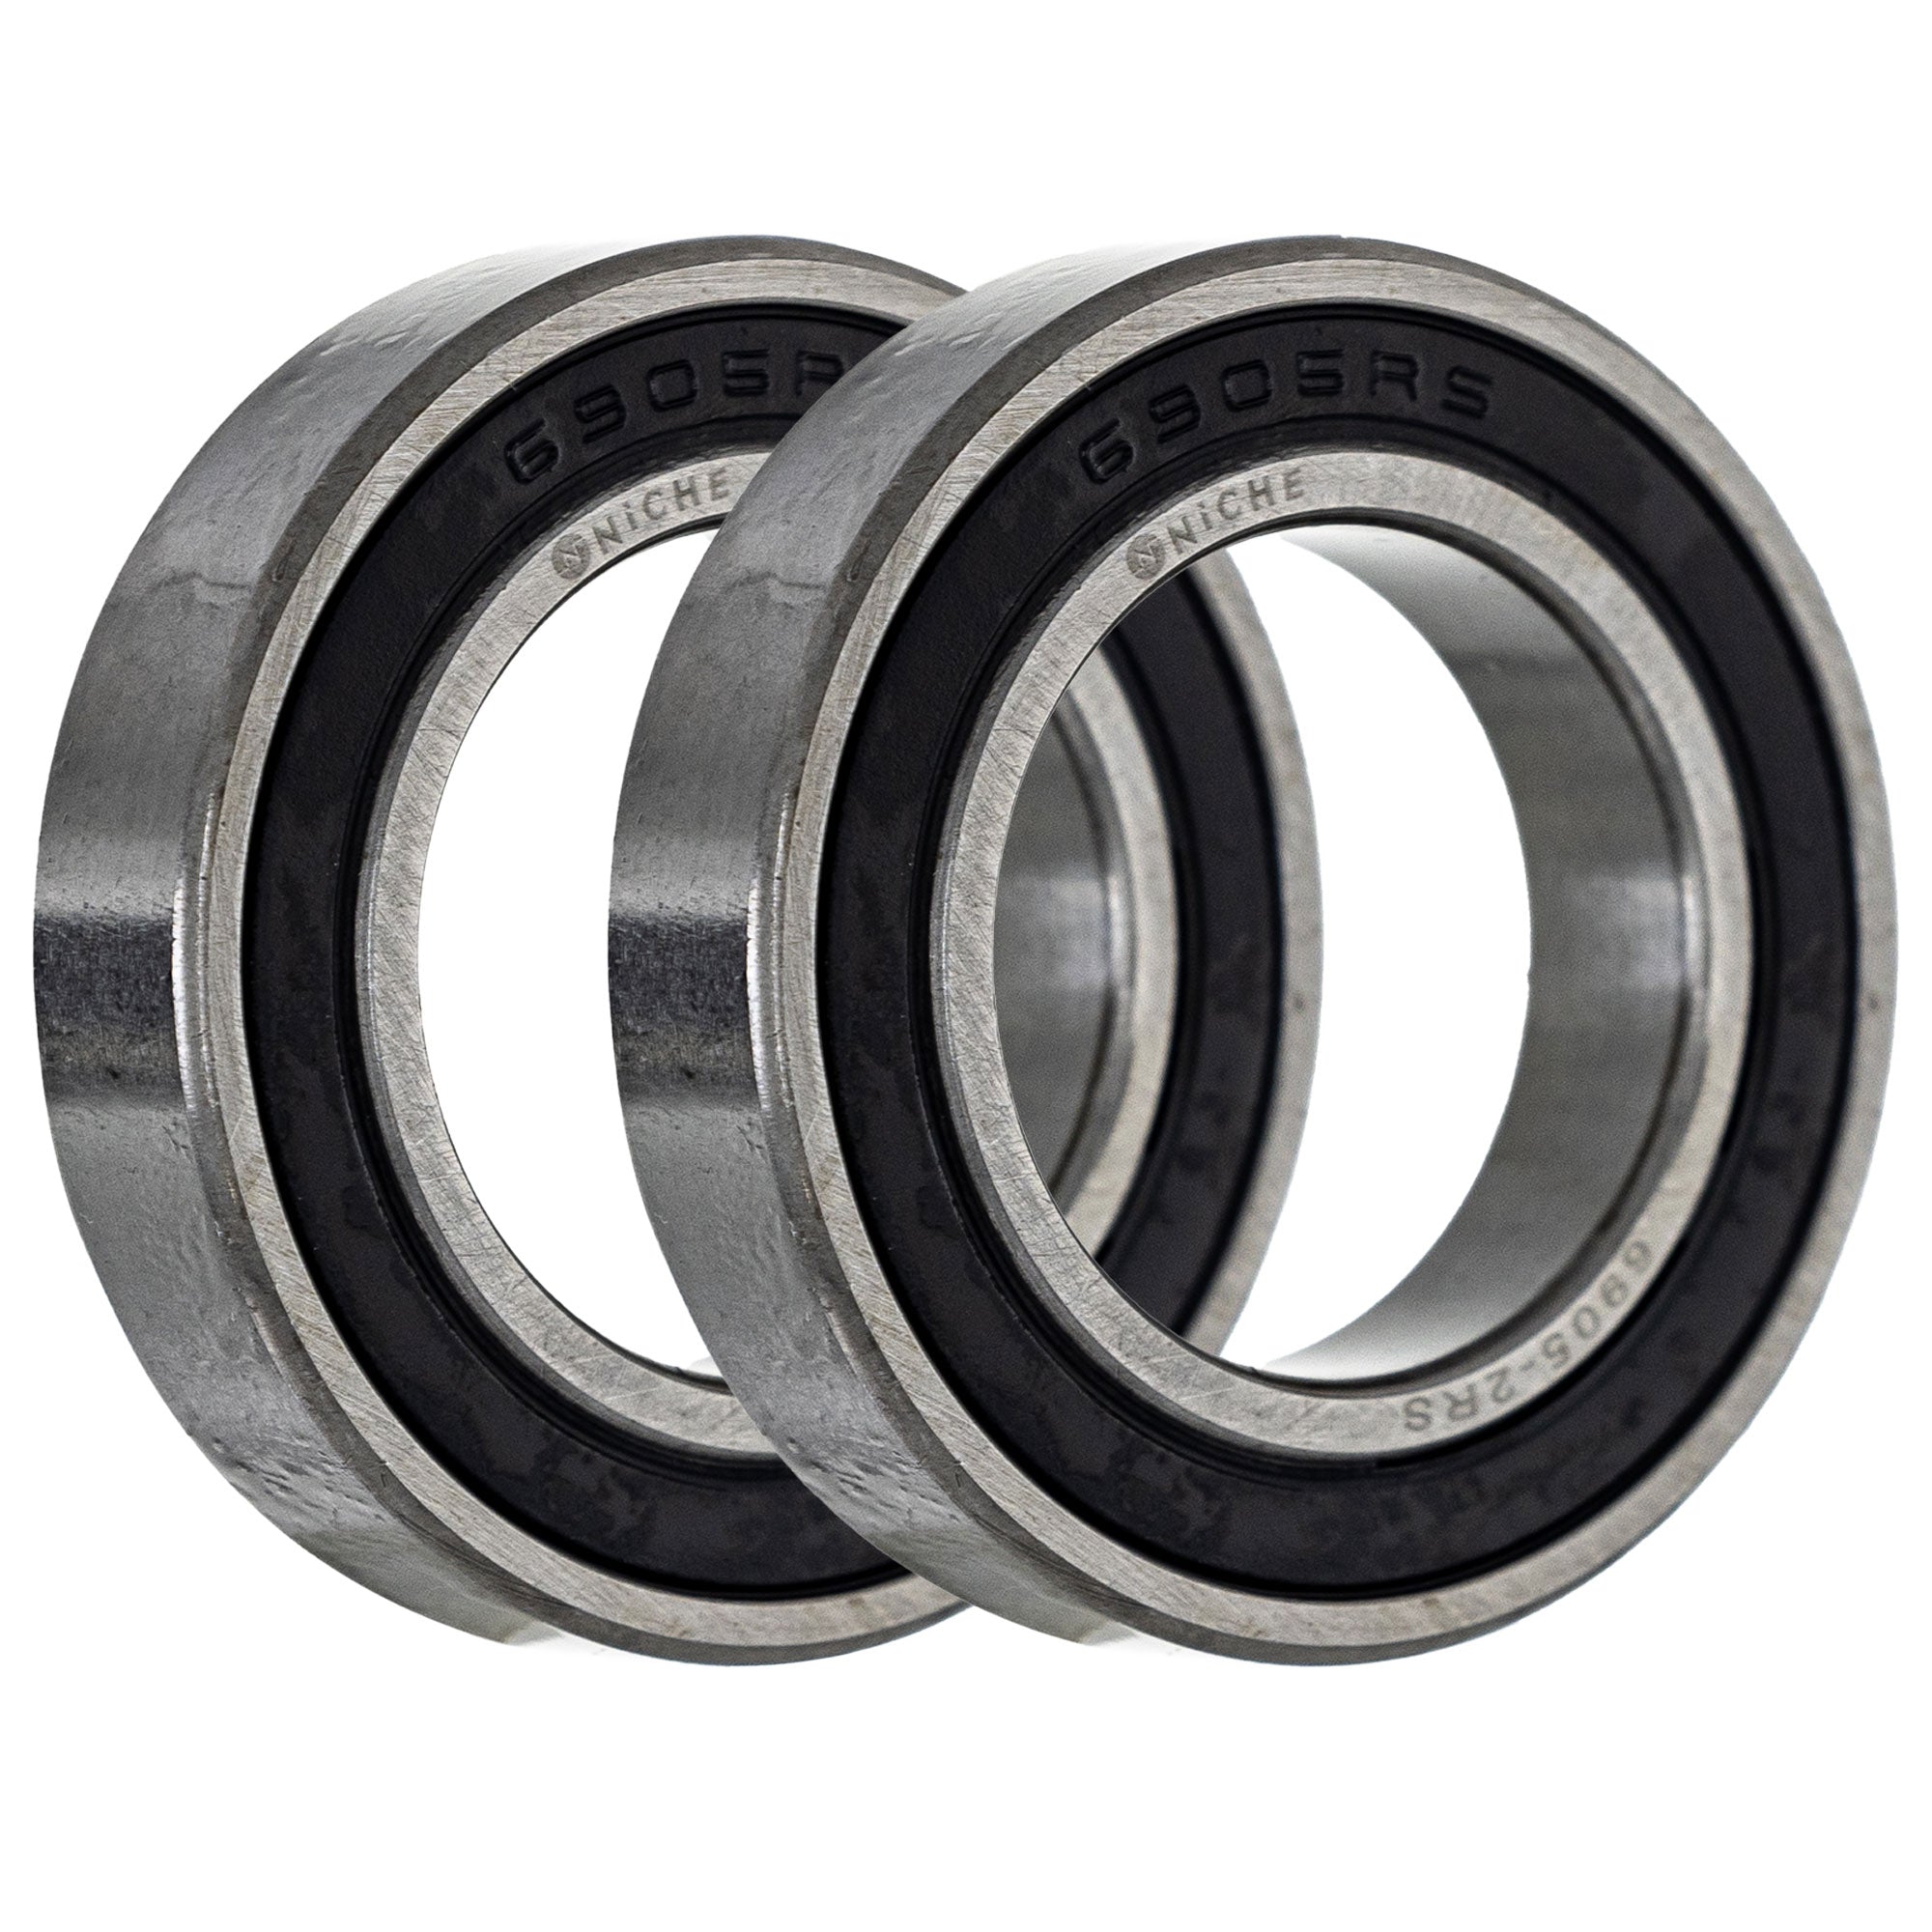 Single Row, Deep Groove, Ball Bearing Pack of 2 2-Pack for zOTHER VTX1800T3 VTX1800T2 NICHE 519-CBB2251R